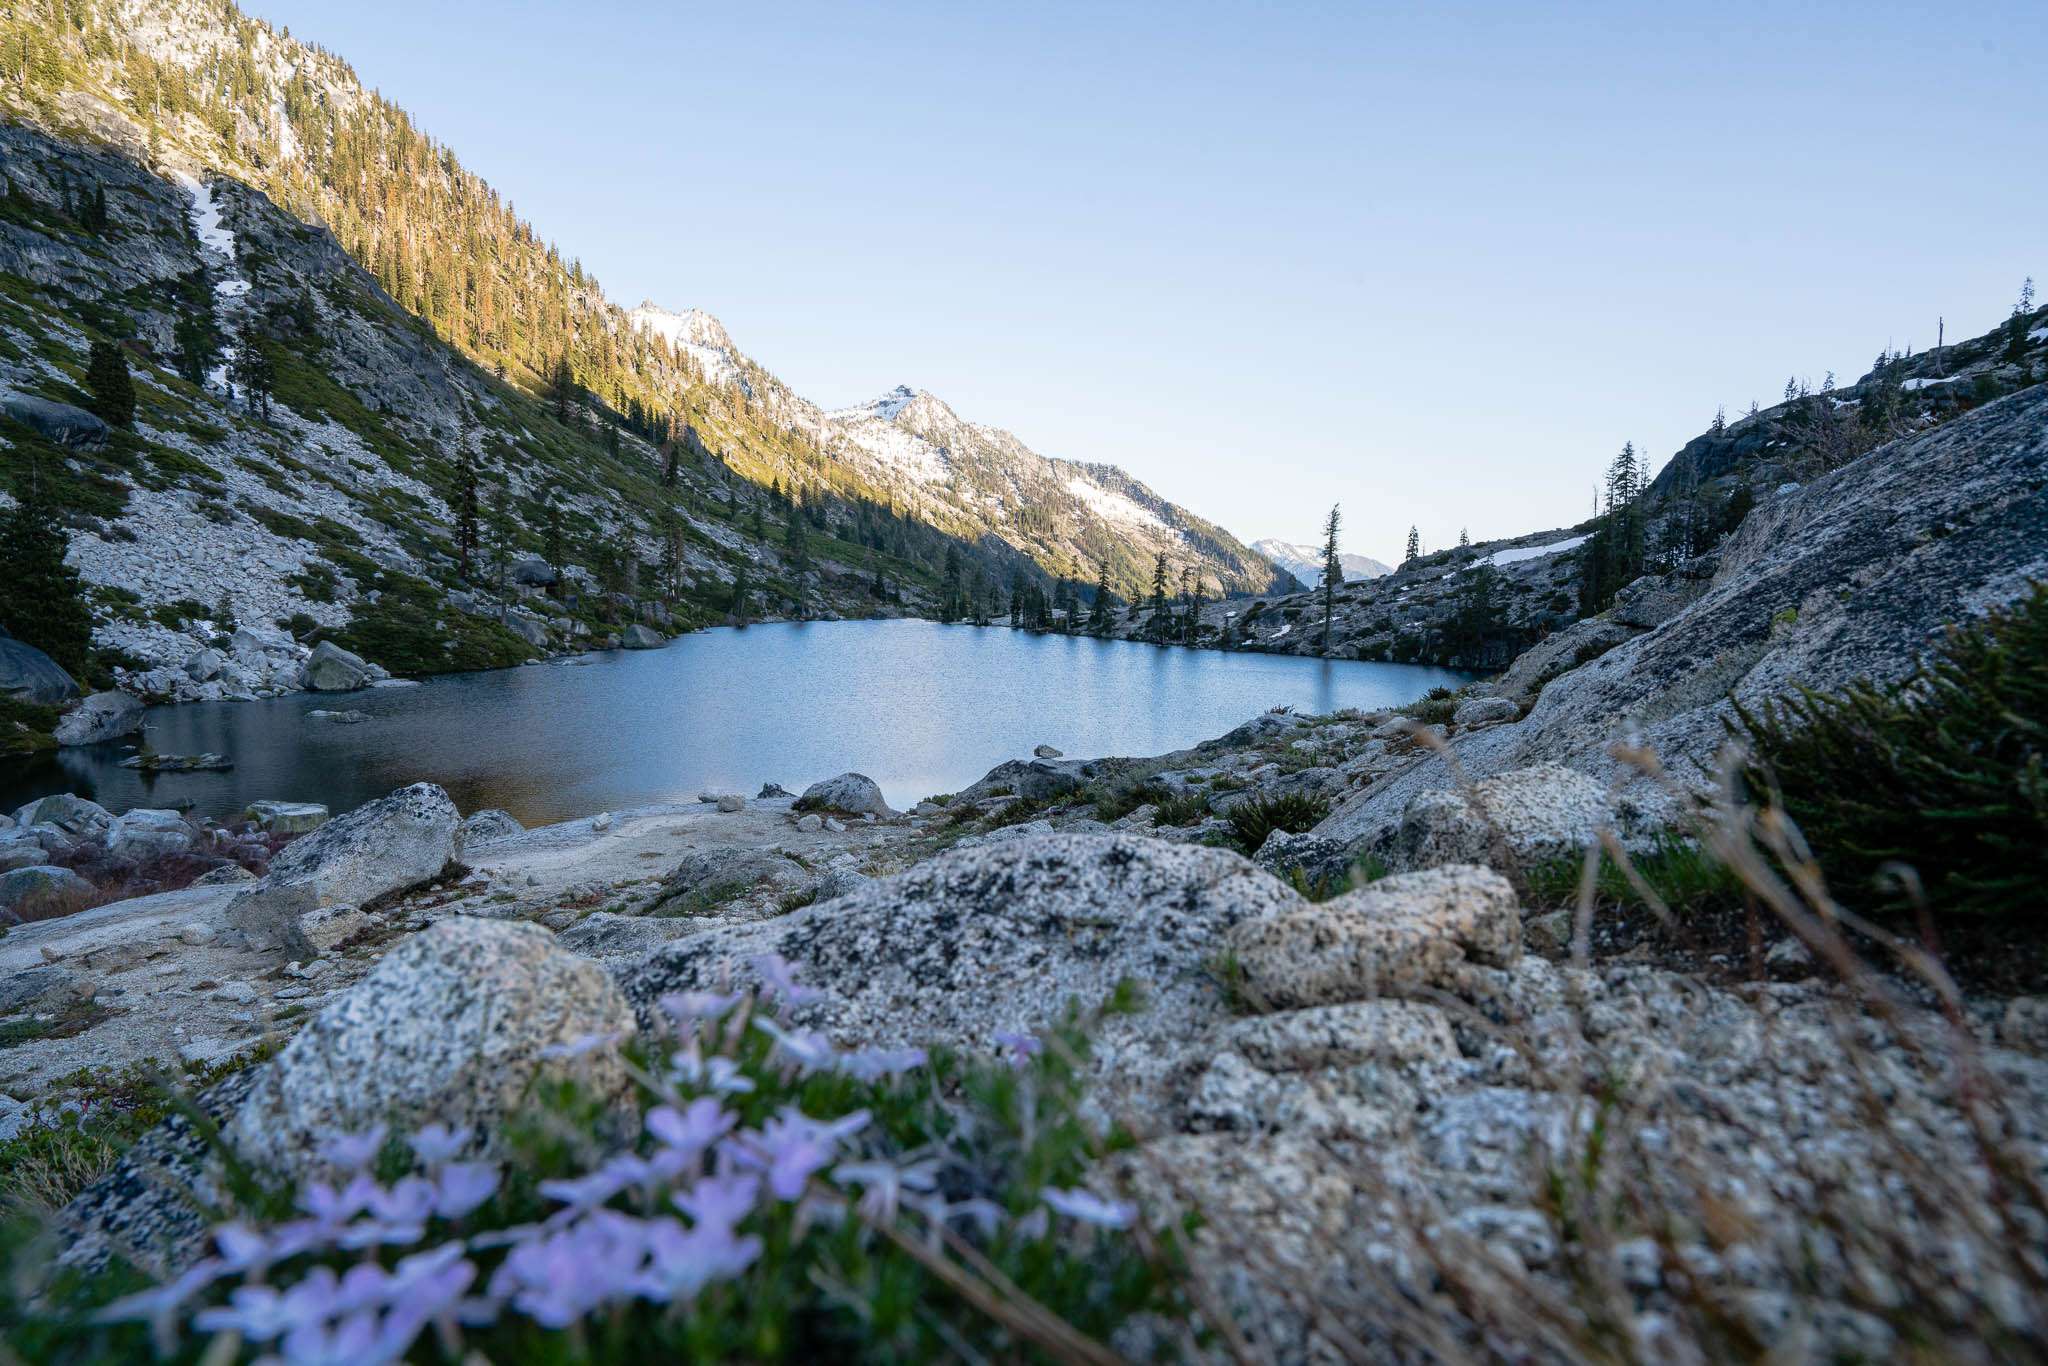 Backpacking the Canyon Creek Lakes Trail in the Trinity Alps